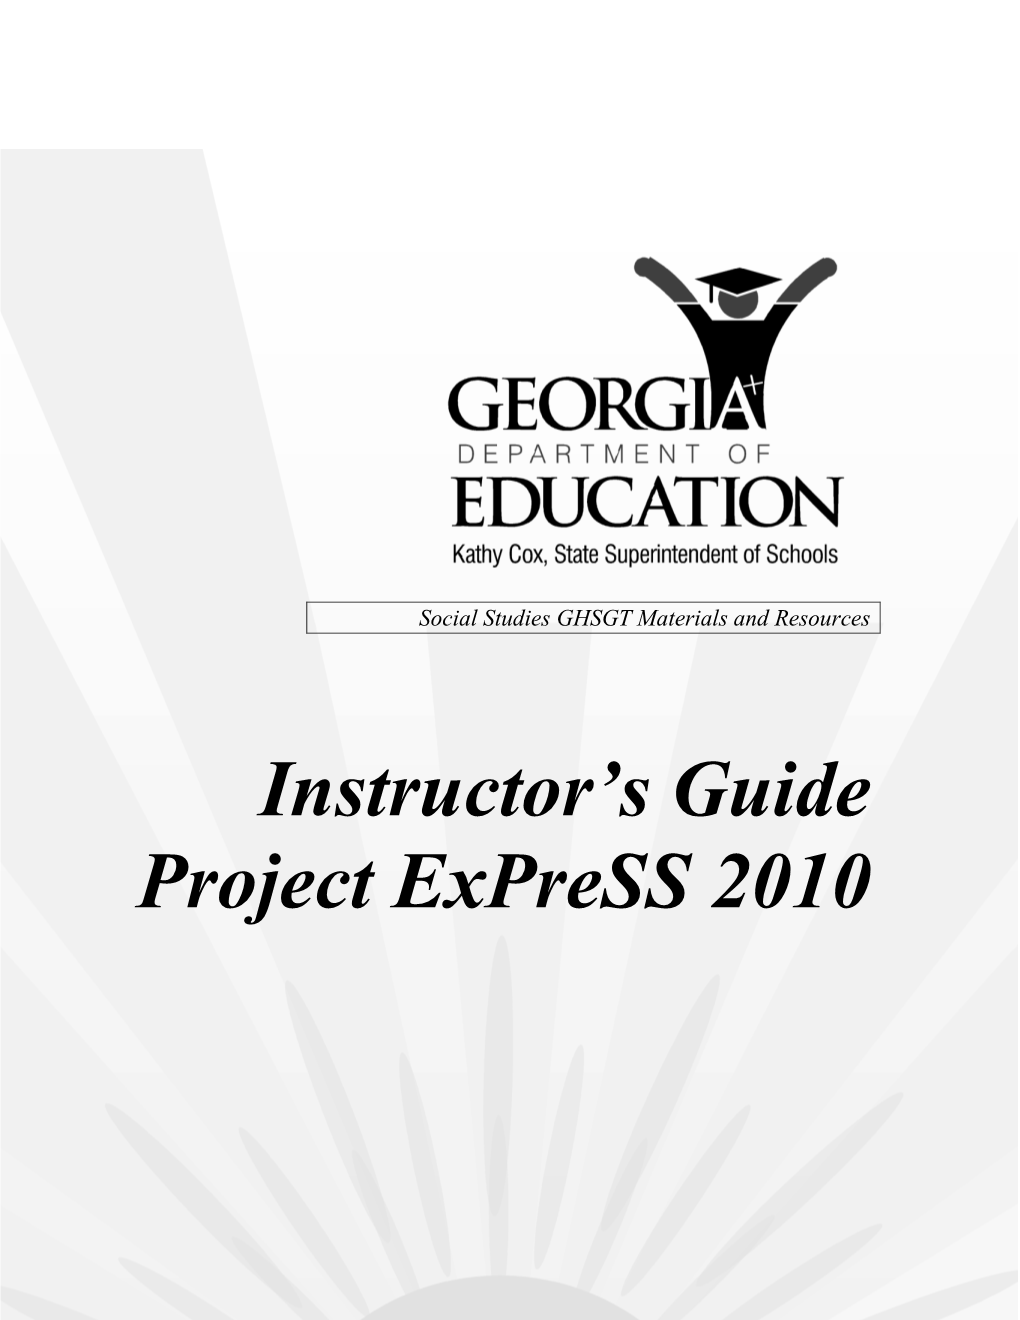 Instructor's Guide Project Express 2010